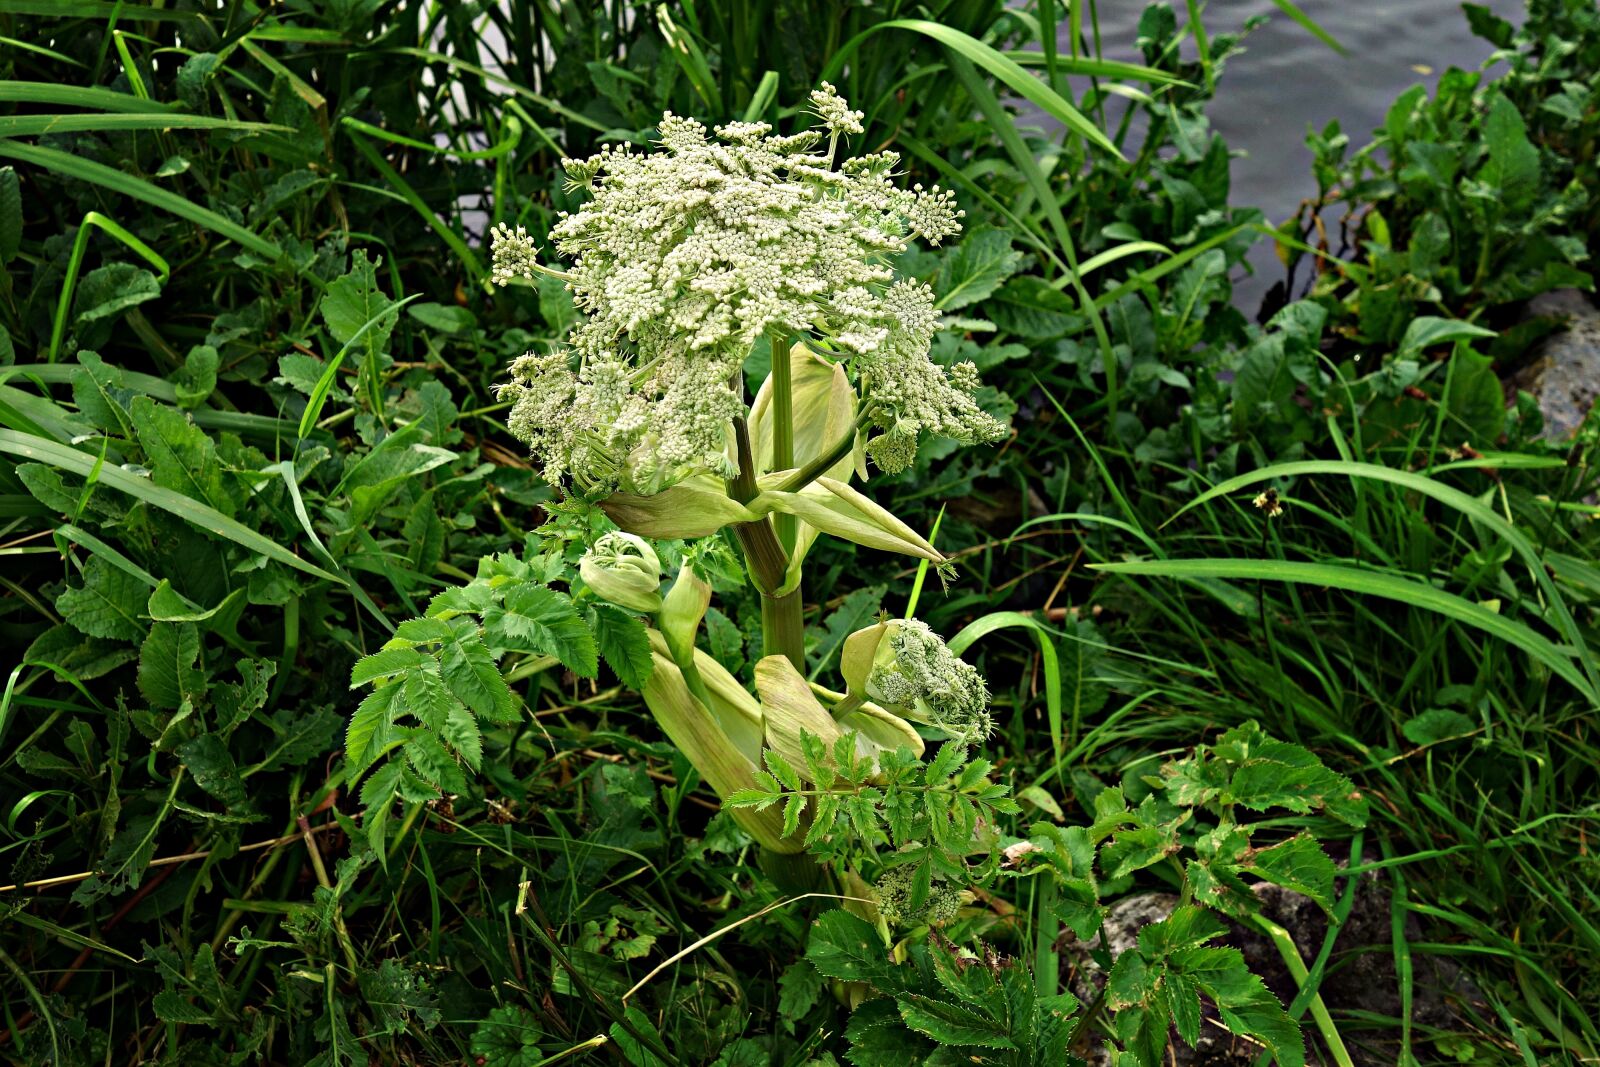 Sony Cyber-shot DSC-RX100 sample photo. Hogweed, giant hogweed, plant photography